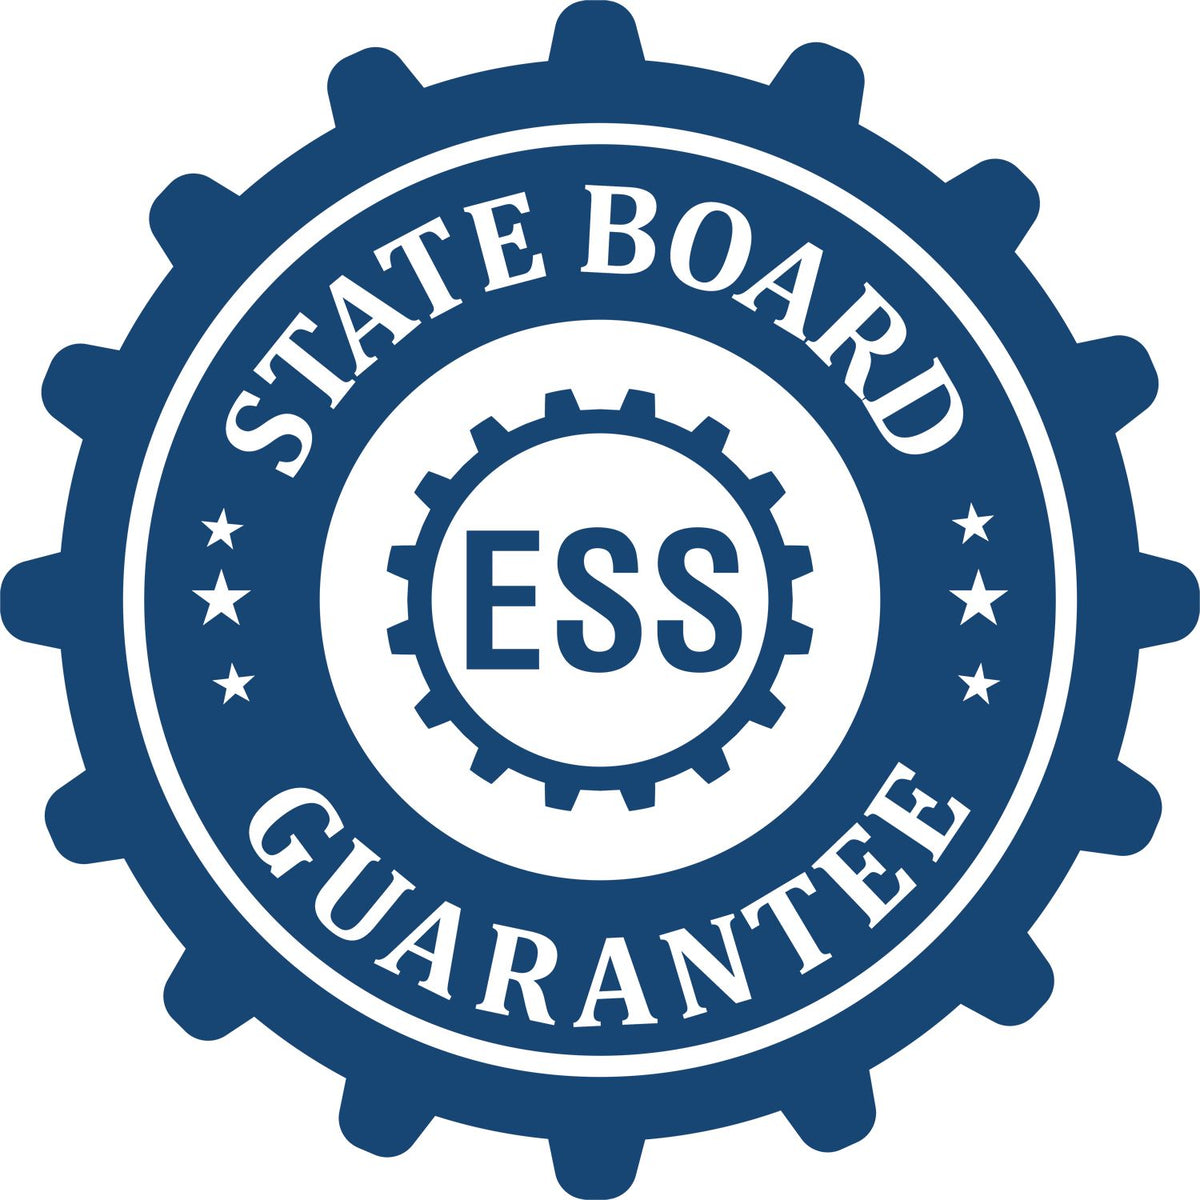 An emblem in a gear shape illustrating a state board guarantee for the Premium MaxLight Pre-Inked Louisiana Landscape Architectural Stamp product.